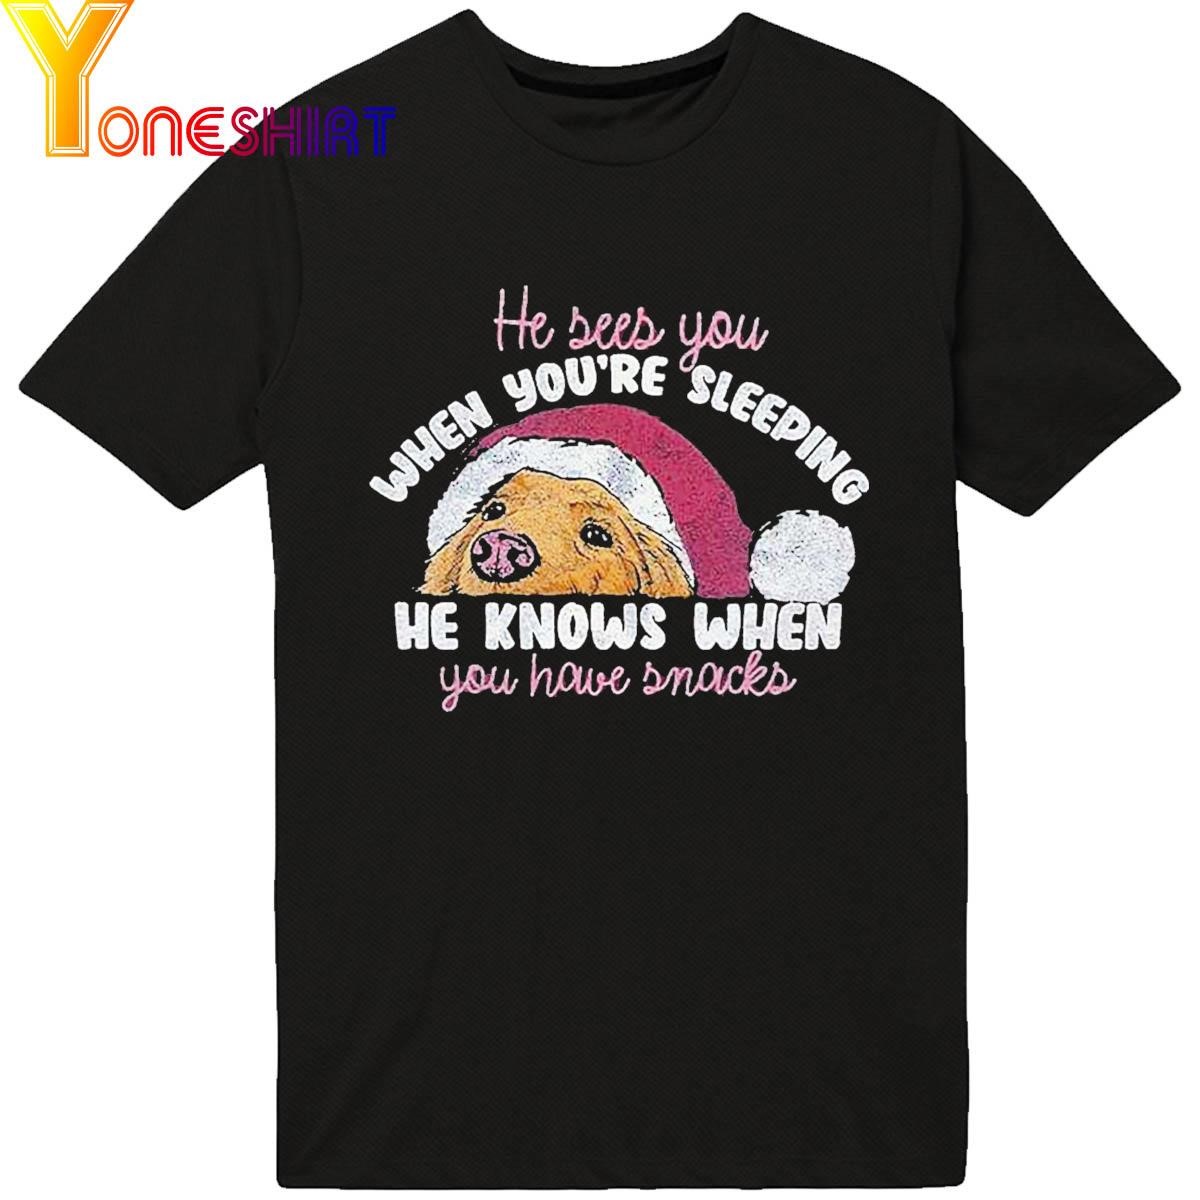 He Sees You When You're Sleeping He Knows When You House Snacks Shirt